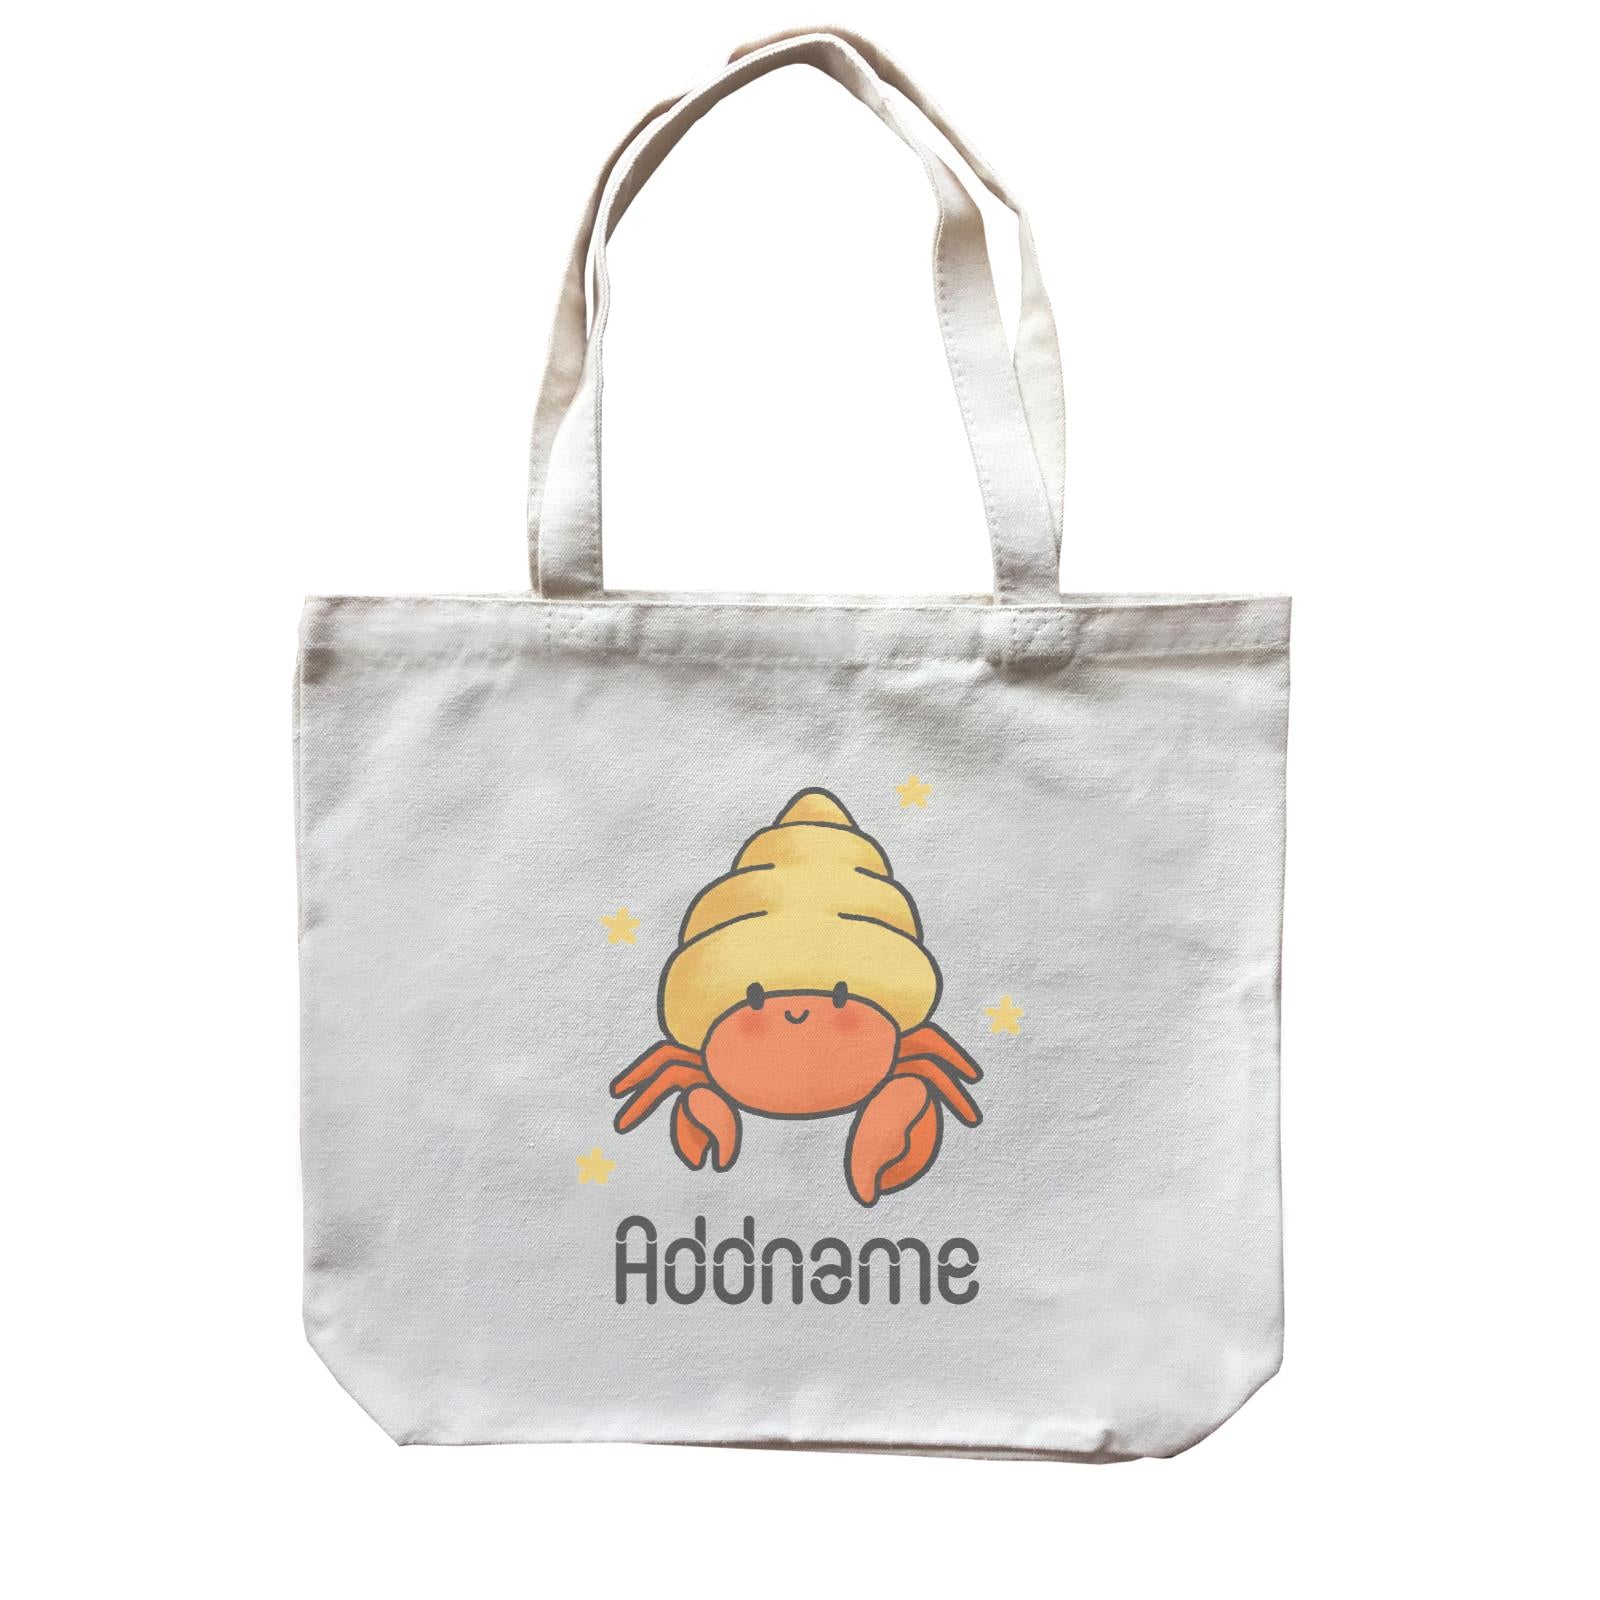 Cute Hand Drawn Style Hermit Crab Addname Canvas Bag